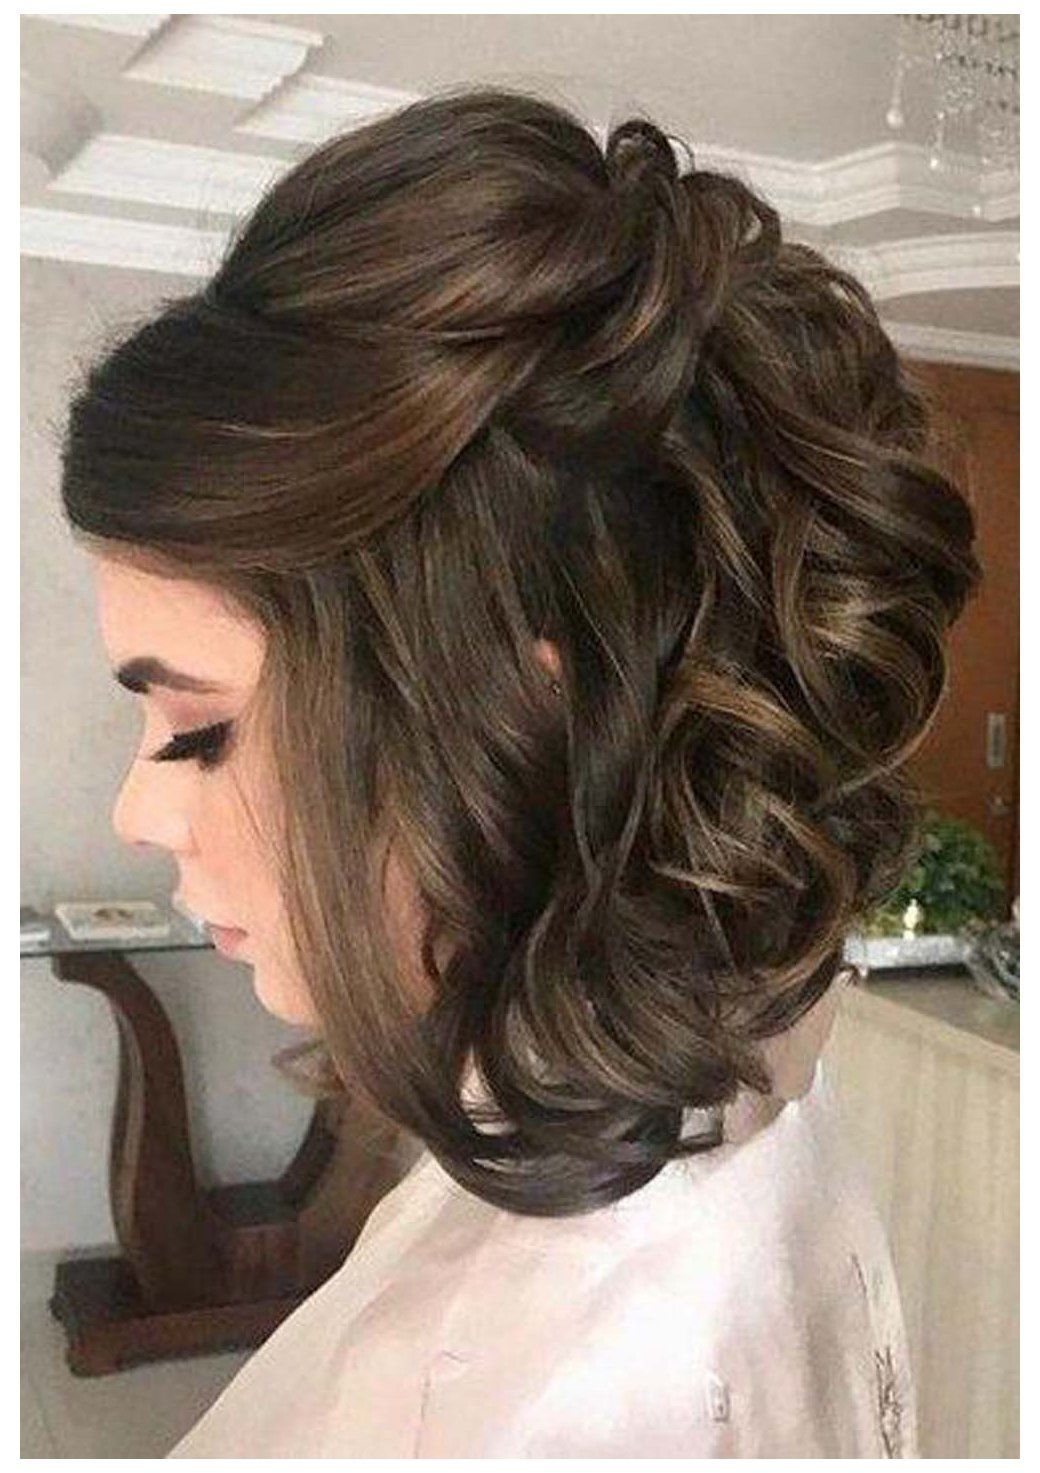 Pretty Looking Prom Hairstyles For Short Hair To Get Inspiration #promhairstyles -   14 hair Prom night ideas